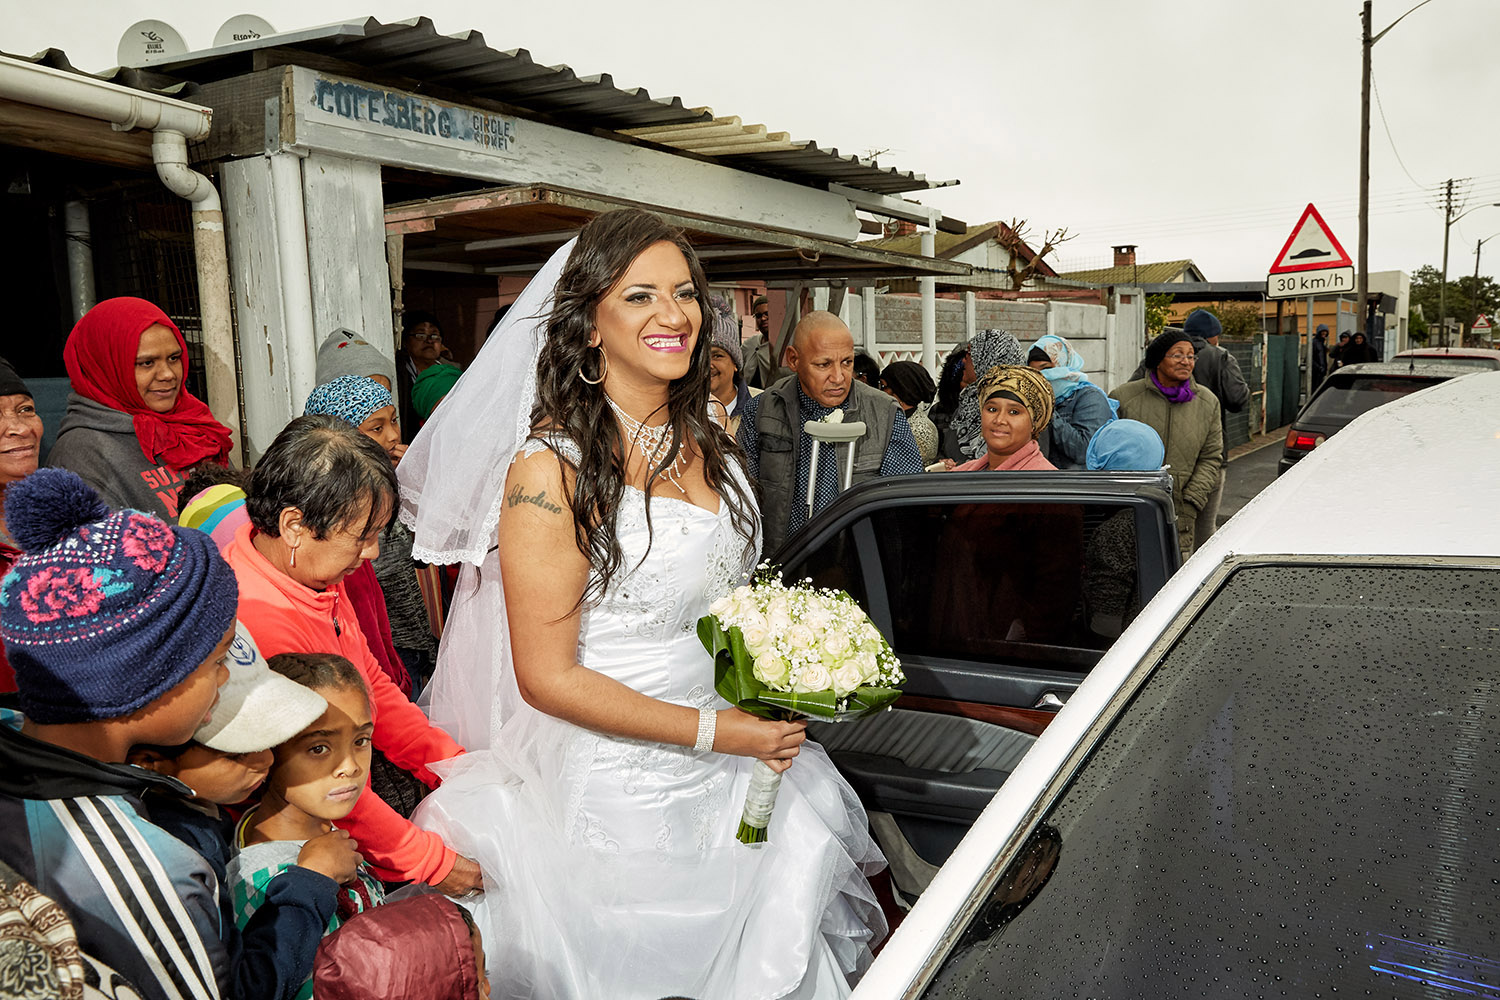  Surrounded by curious neighbours Chedino gets into the limousine which will take her to the wedding venue at Muizenberg Civic Centre, Heideveld, Cape Town, 2018. 